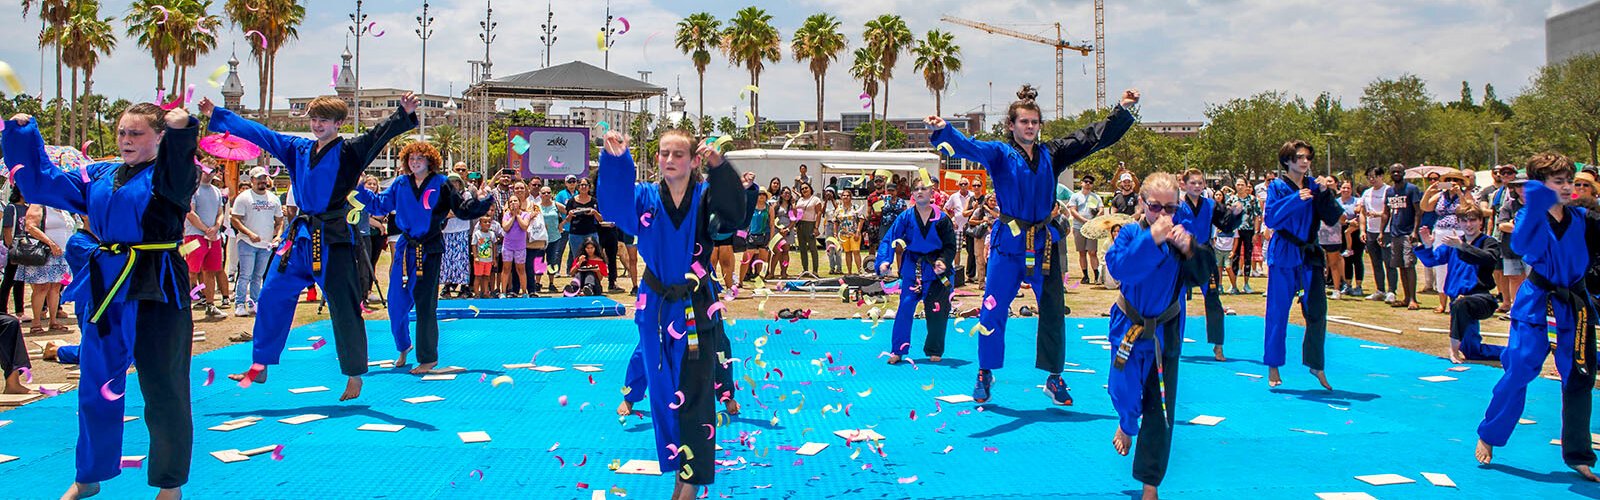 Members of the Florida Taekwondo State Demonstration Team perform at the City of Tampa Asian Pacific Islander Cultural Festival.